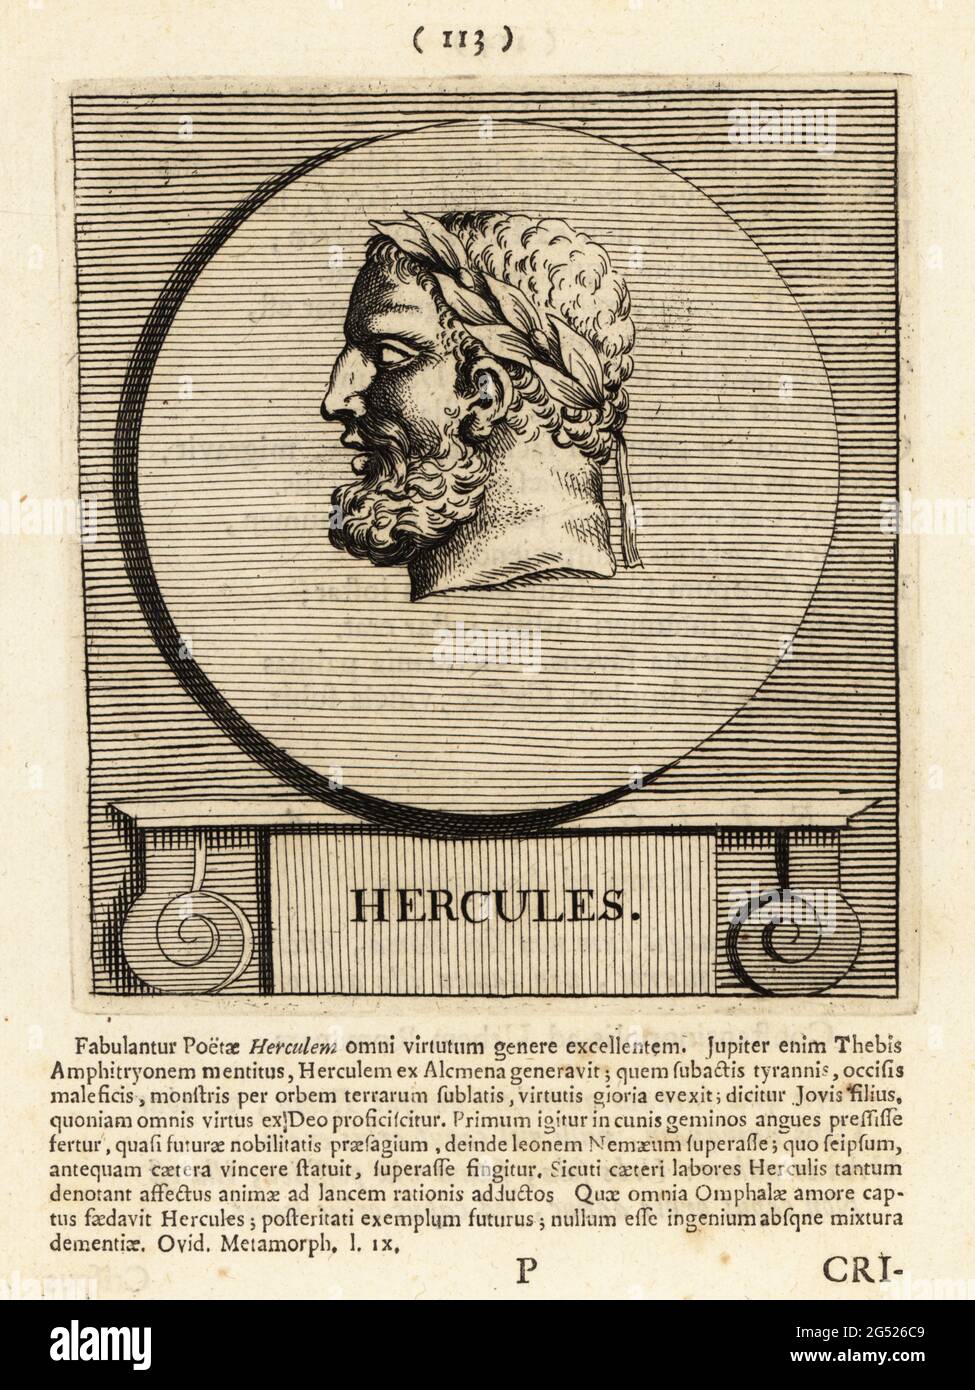 Hercules in laurel wreath. Roman equivalent of the Greek divine hero Heracles, son of Jupiter and the mortal Alcmene. In classical mythology, Famous for his strength and for his 12 Labours and adventures. Copperplate engraving by Pieter Bodart (1676-1712) from Henricus Spoor’s Deorum et Heroum, Virorum et Mulierum Illustrium Imagines Antiquae Illustatae, Gods and Heroes, Men and Women, Illustrated with Antique Images, Petrum, Amsterdam, 1715. First published as Favissæ utriusque antiquitatis tam Romanæ quam Græcæ in 1707. Henricus Spoor was a Dutch physician, classical scholar, poet and writer Stock Photo